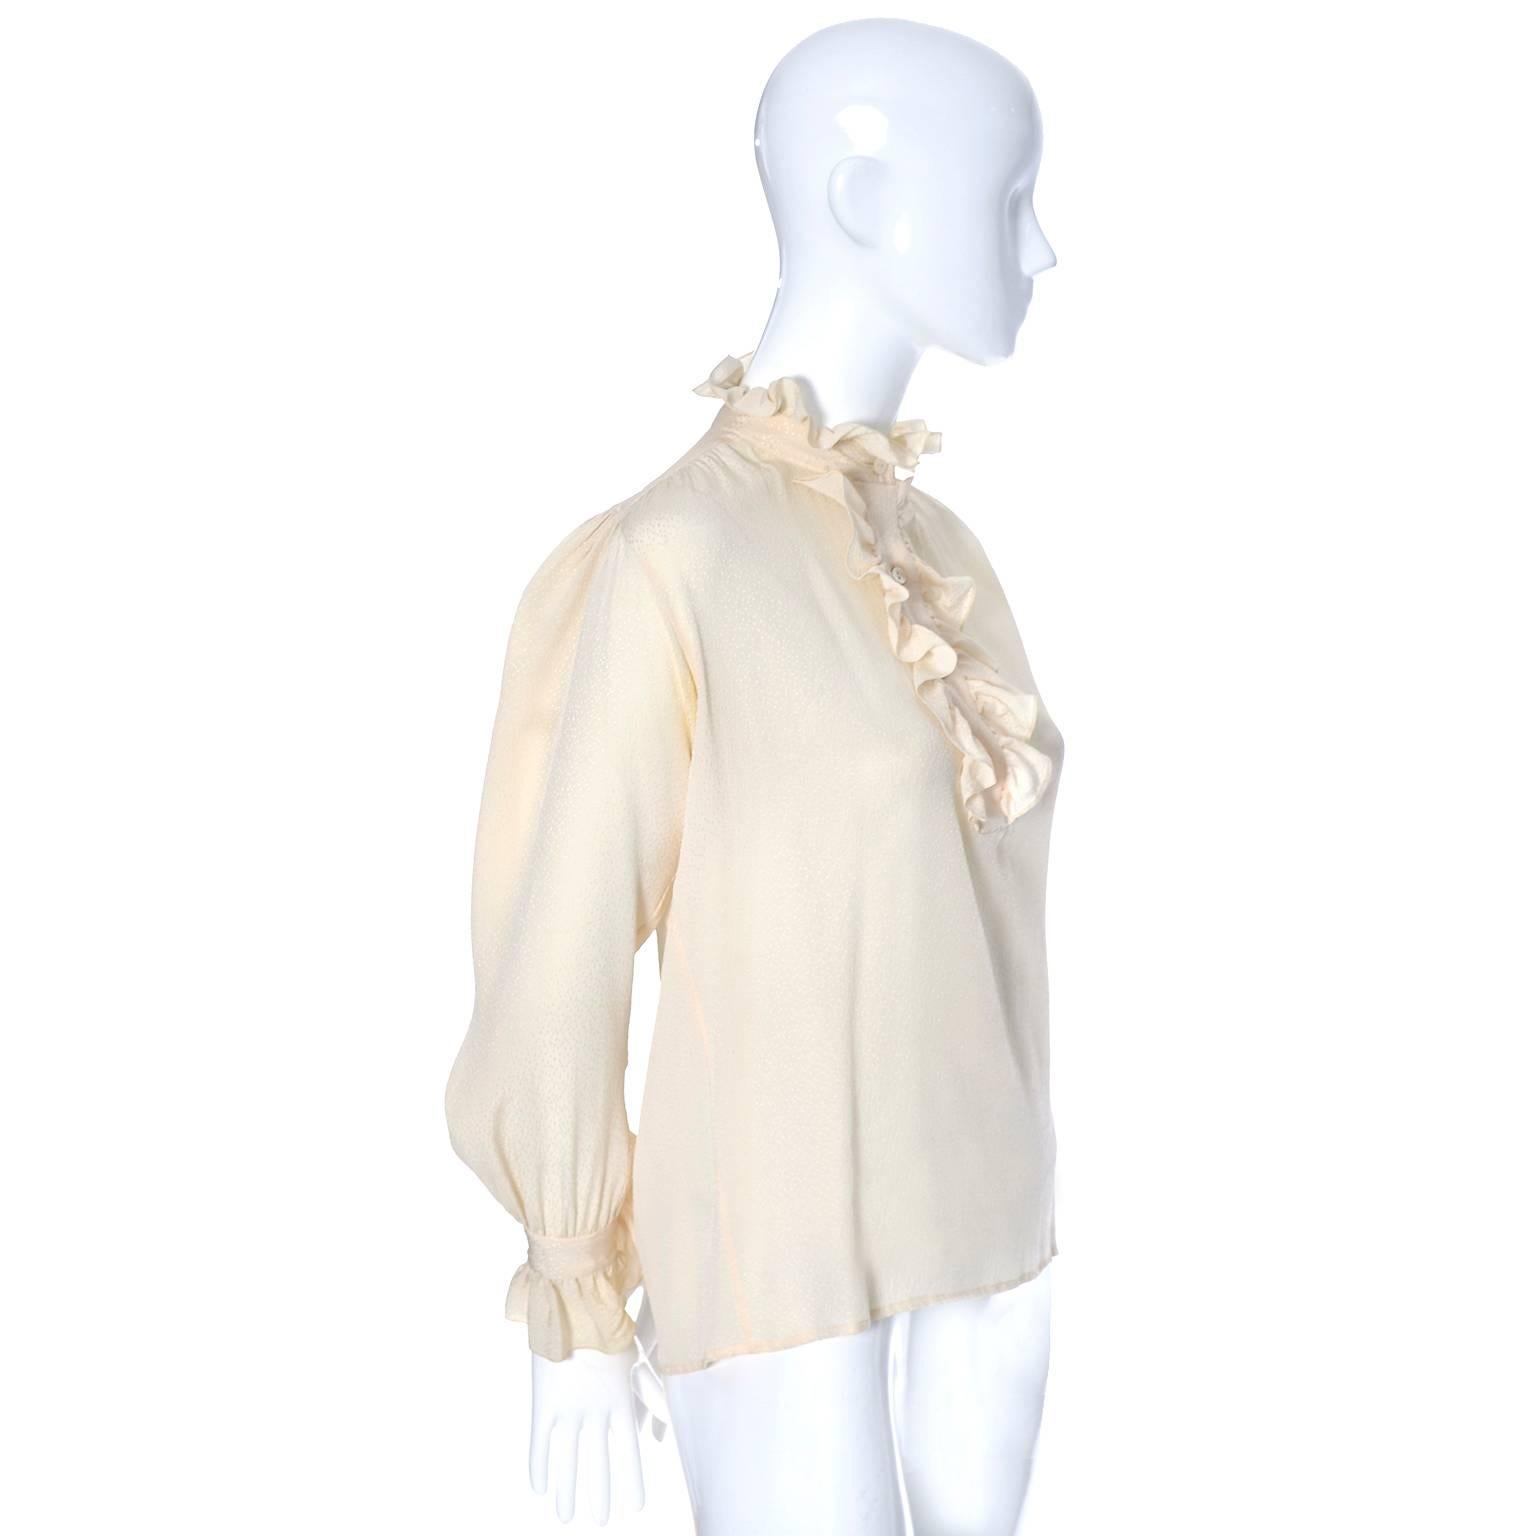 This is a pretty vintage silk blouse from Yves Saint Laurent.  This vintage blouse has the YSL Rive Gauche label and was made in France in the 1970's.  There is a pretty ruffle at the collar, on the cuffs, and around the buttons on the bodice. The